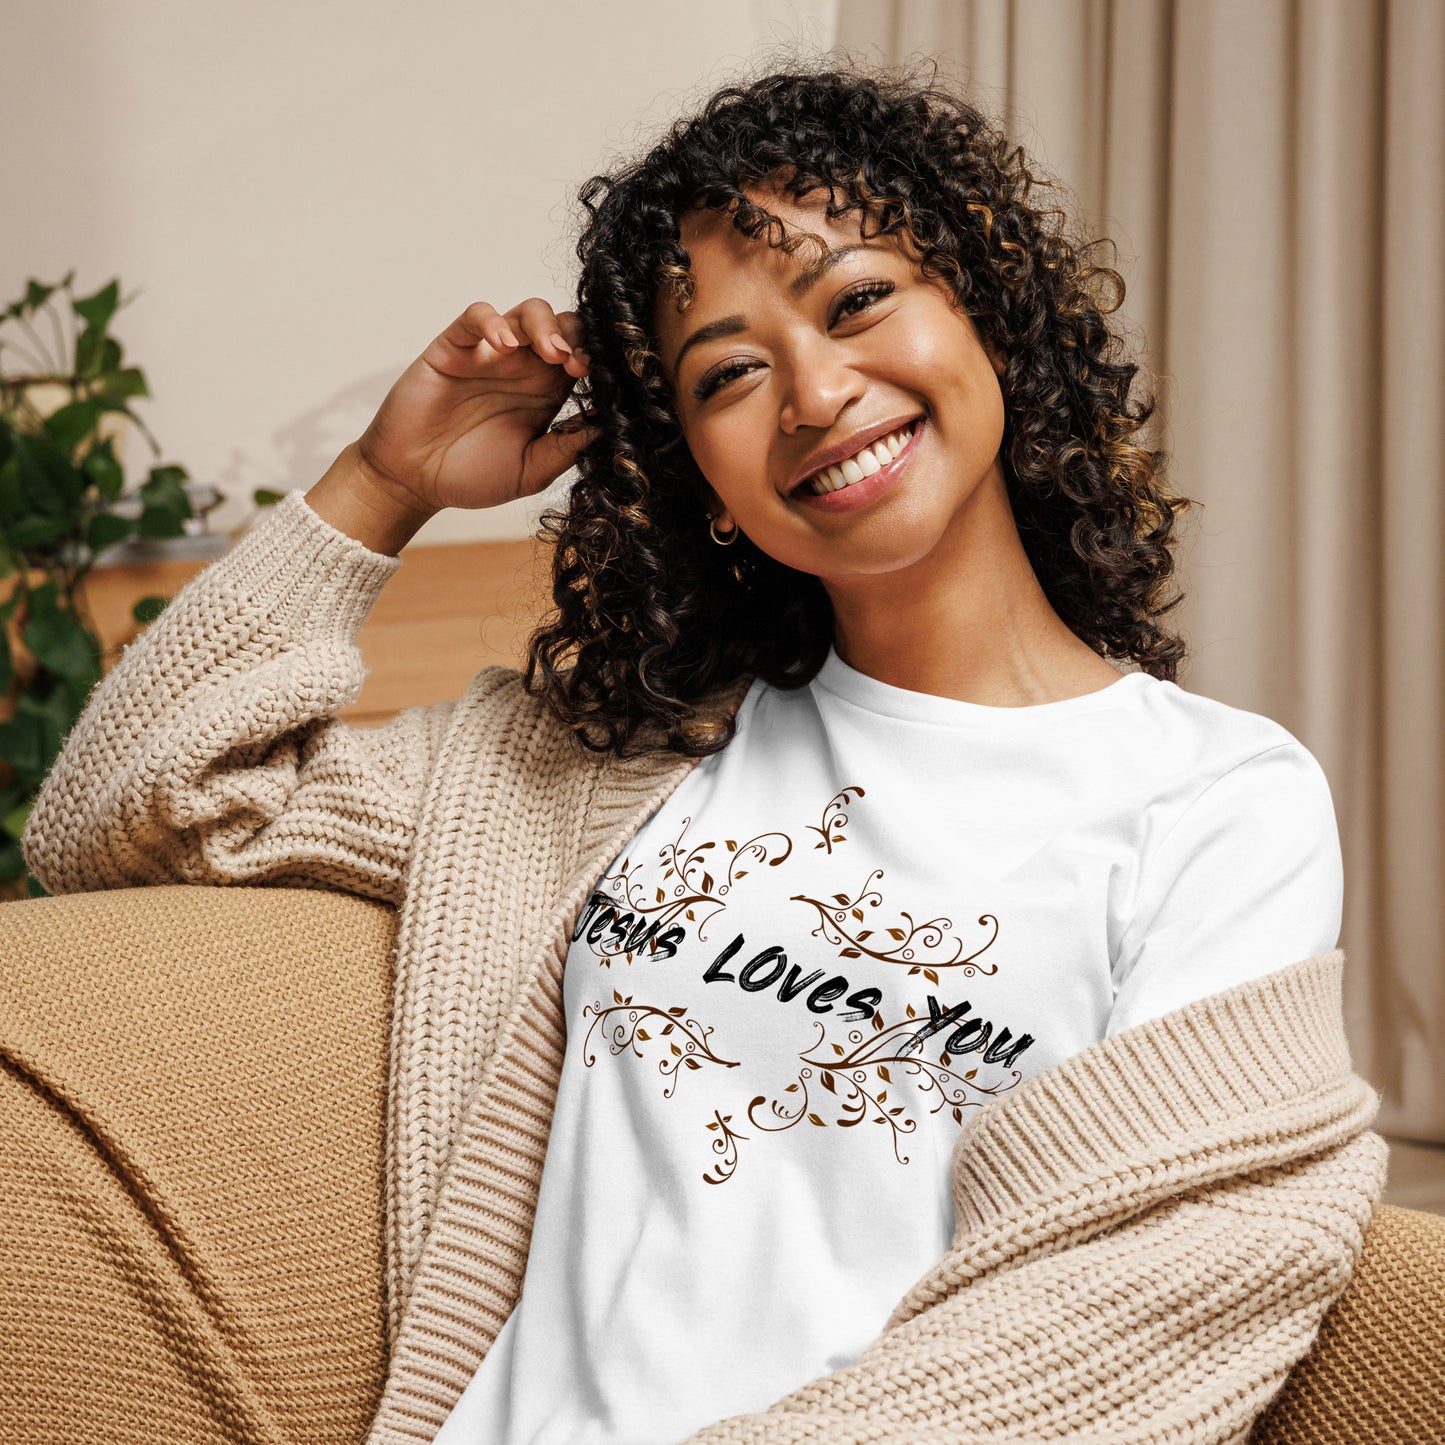 Women's Relaxed T-Shirt JESUS loves you